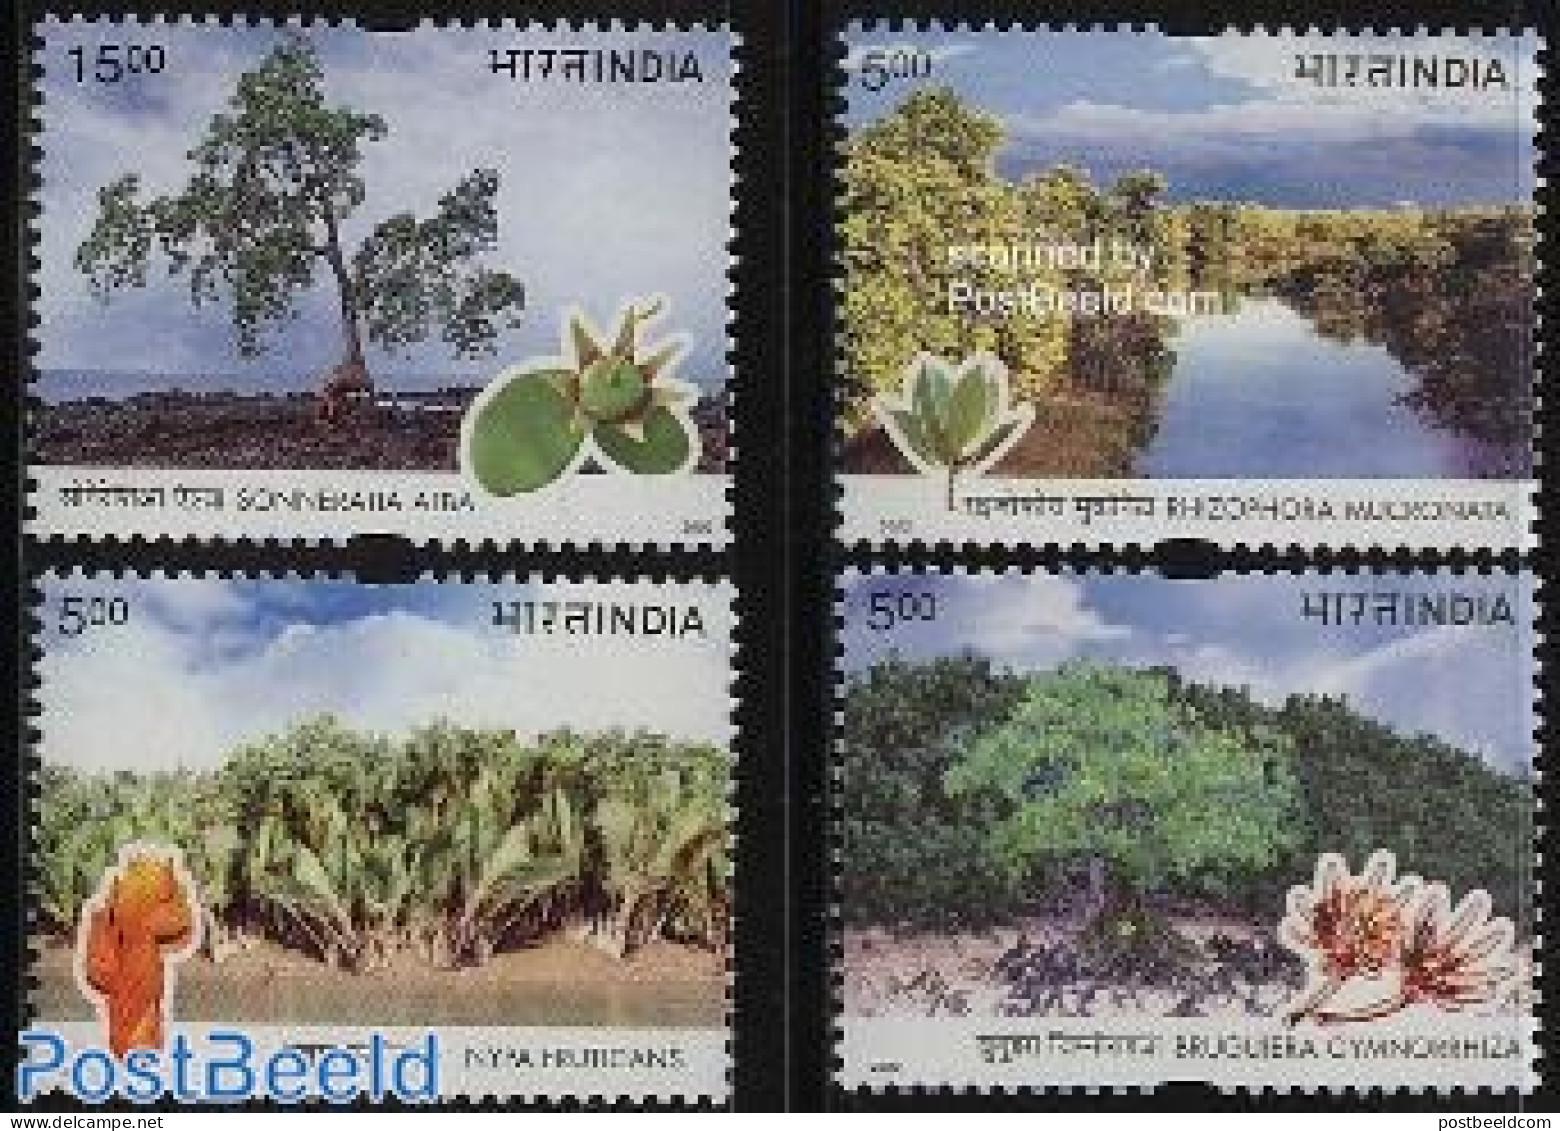 India 2002 Mangroves 4v, Mint NH, Nature - Trees & Forests - Neufs